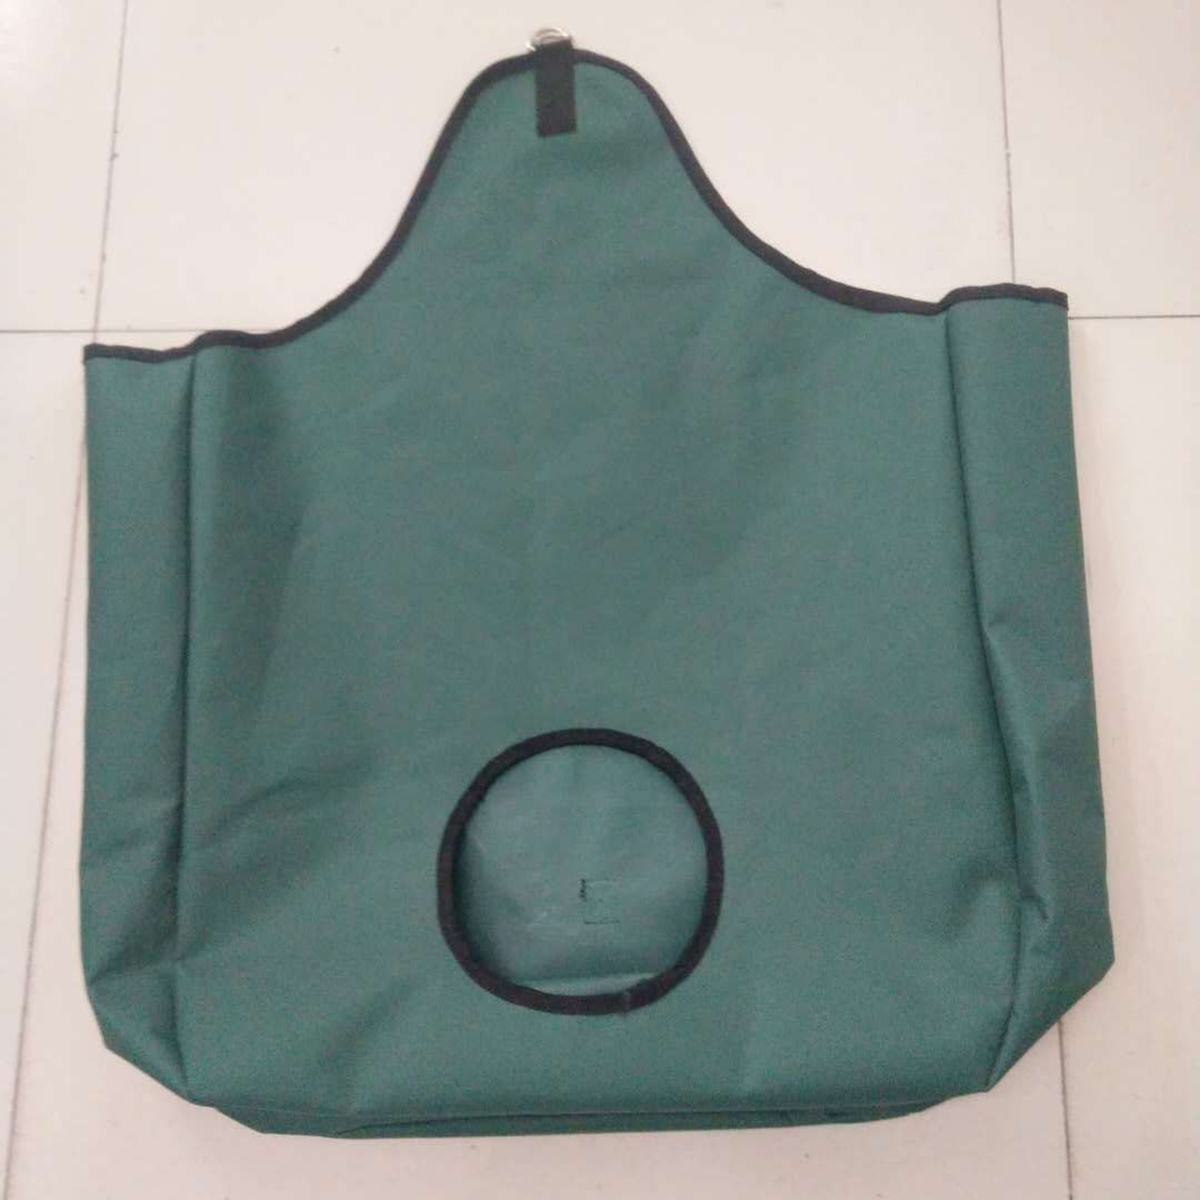 600D-Oxford-Cloth-Horse-Hay-Bag-Feeder-Net-With-Cut-Out-Hole-Reduce-Wastage-Farm-Supplies-1337101-5